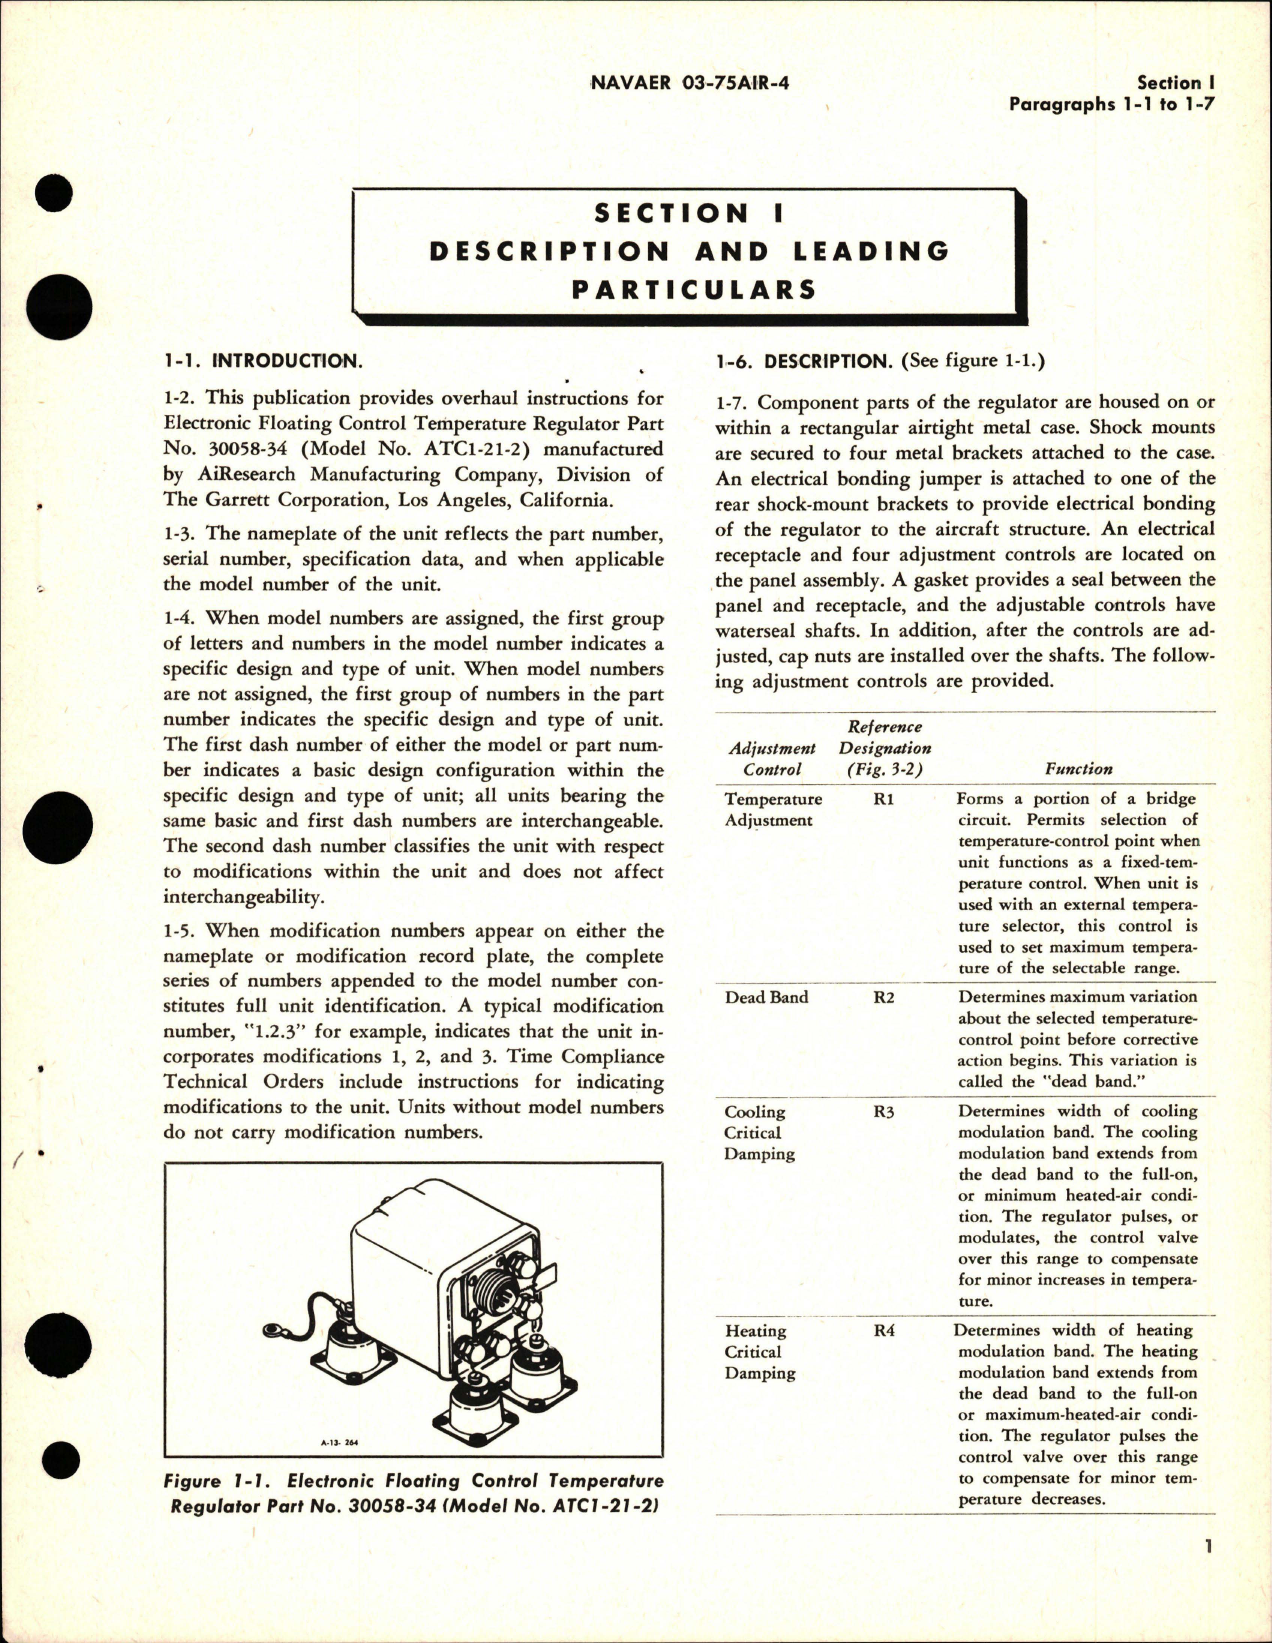 Sample page 5 from AirCorps Library document: Overhaul Instructions for Electronic Floating Control Temperature Regulator - Part 30058-34 - Model ACT1-21